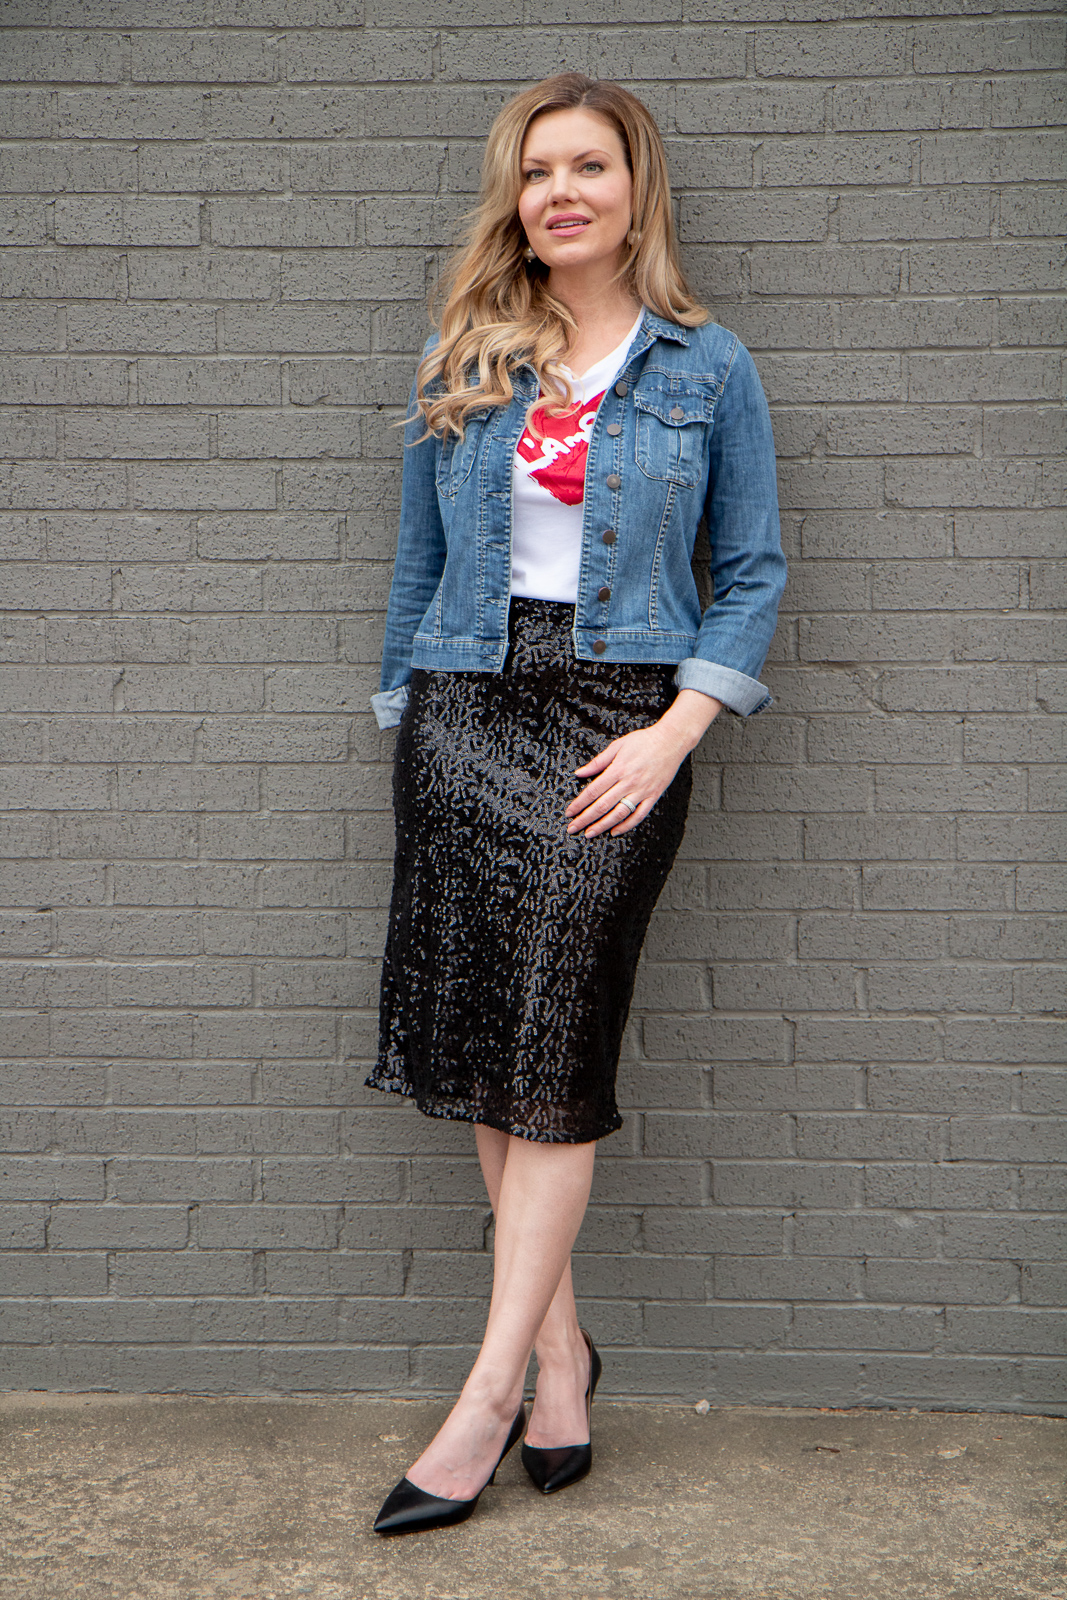 Sequin skirt outfit